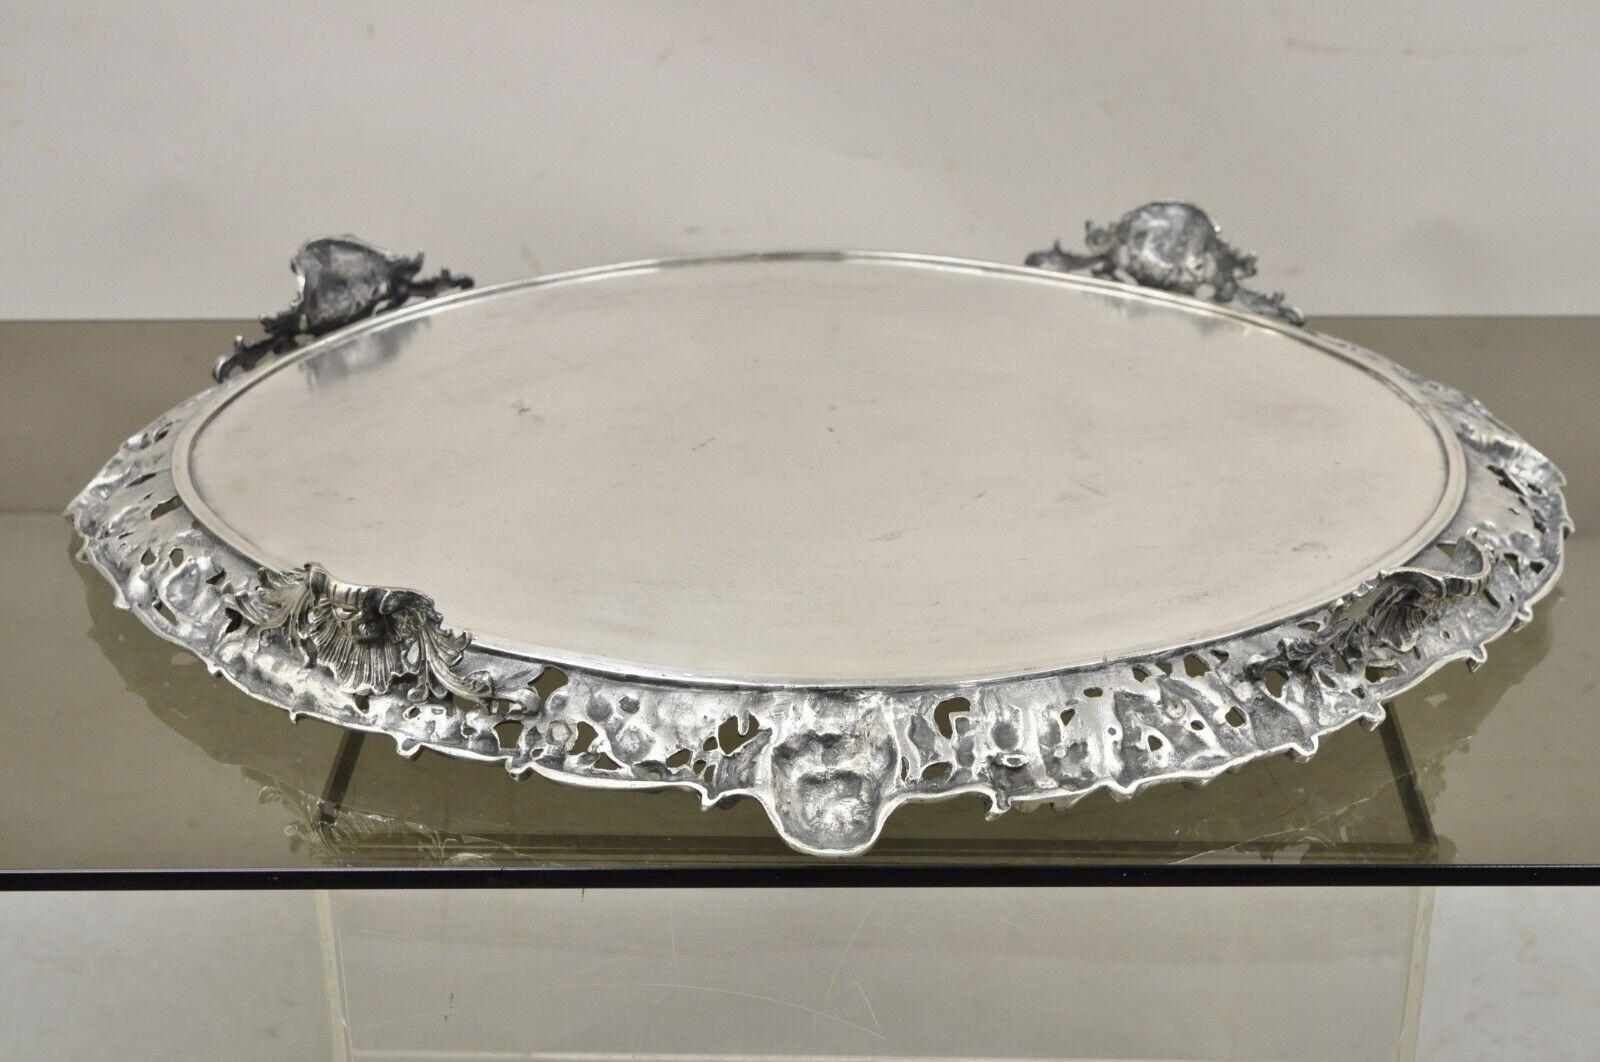 French Renaissance Bacchanal Scene Silver Plated Bacchus Figural Salver Tray For Sale 7